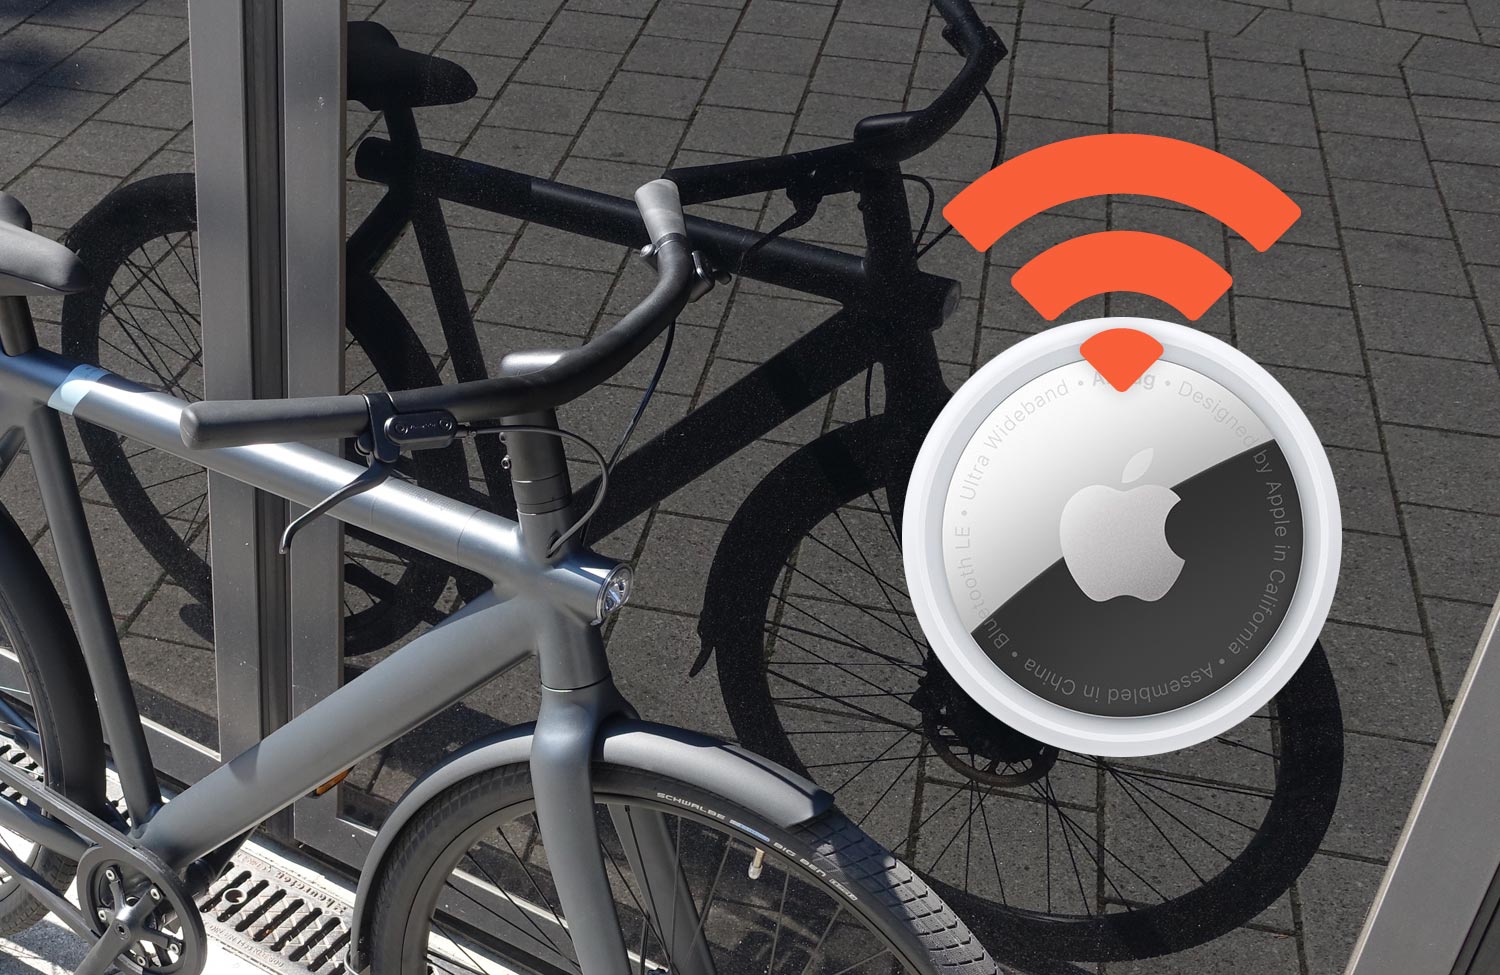 Installing an Apple AirTag on a Bicycle // Best Locations to